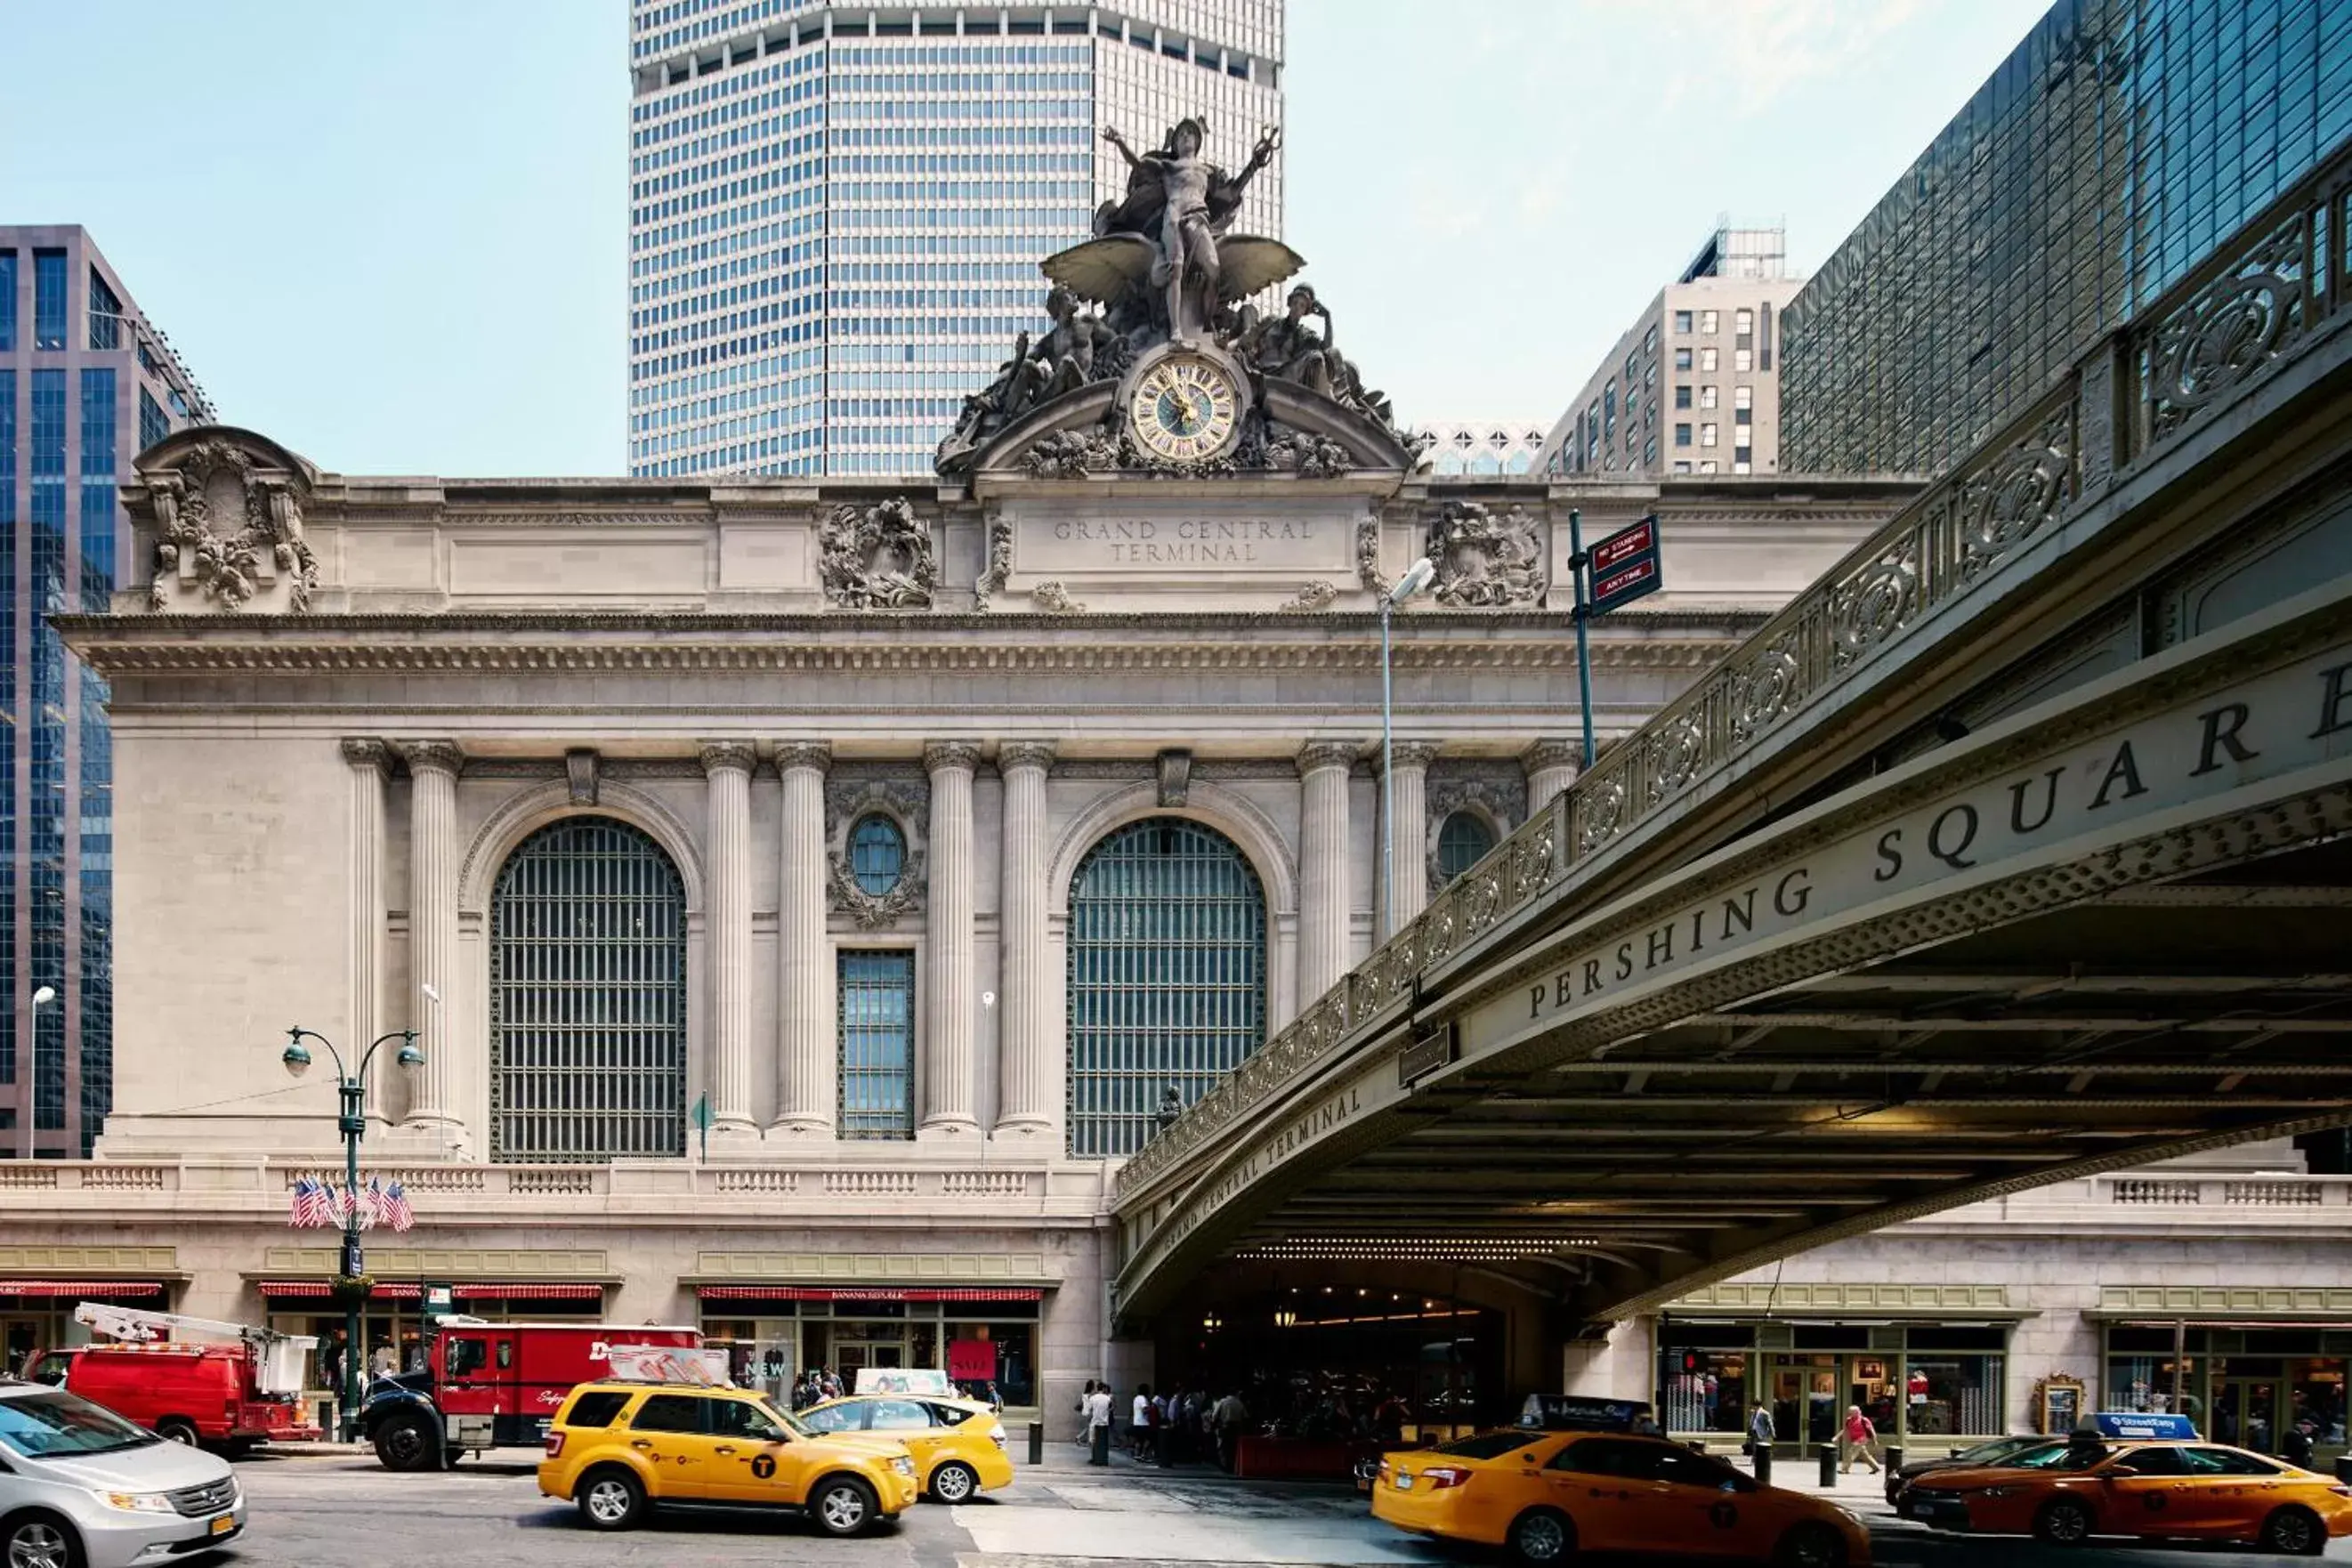 Nearby landmark, Property Building in Hotel Boutique at Grand Central